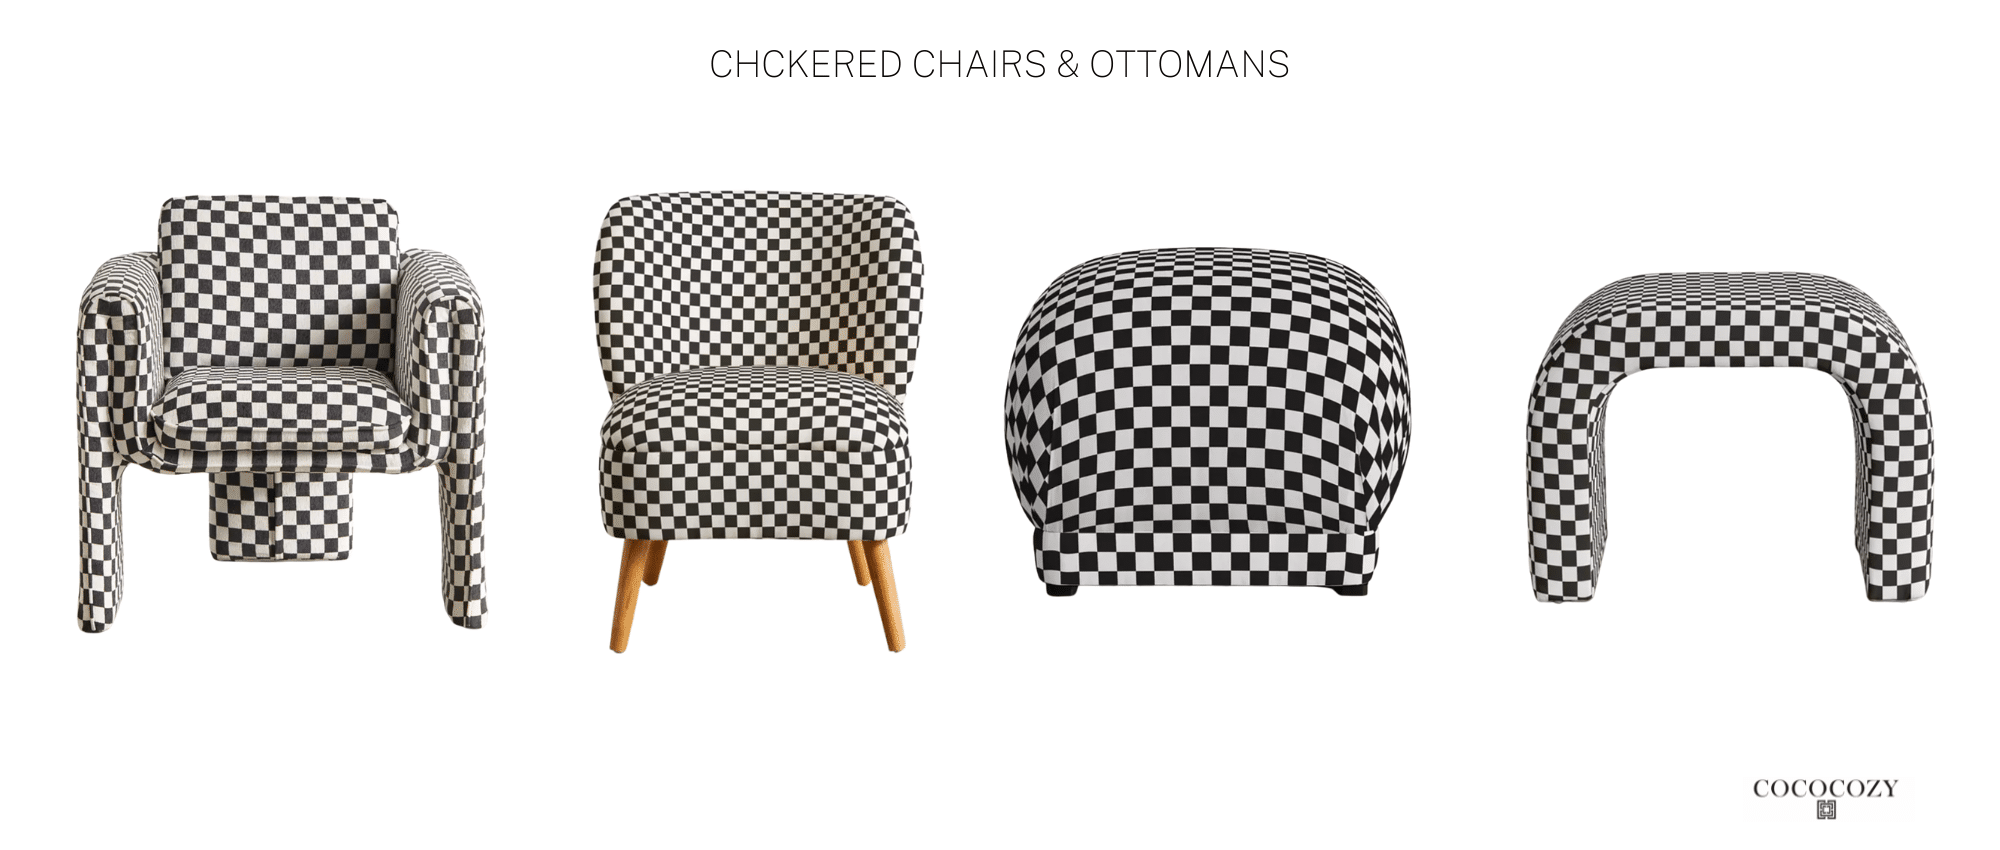 Alt tag for checkered-chairs-ottoman-cococozy